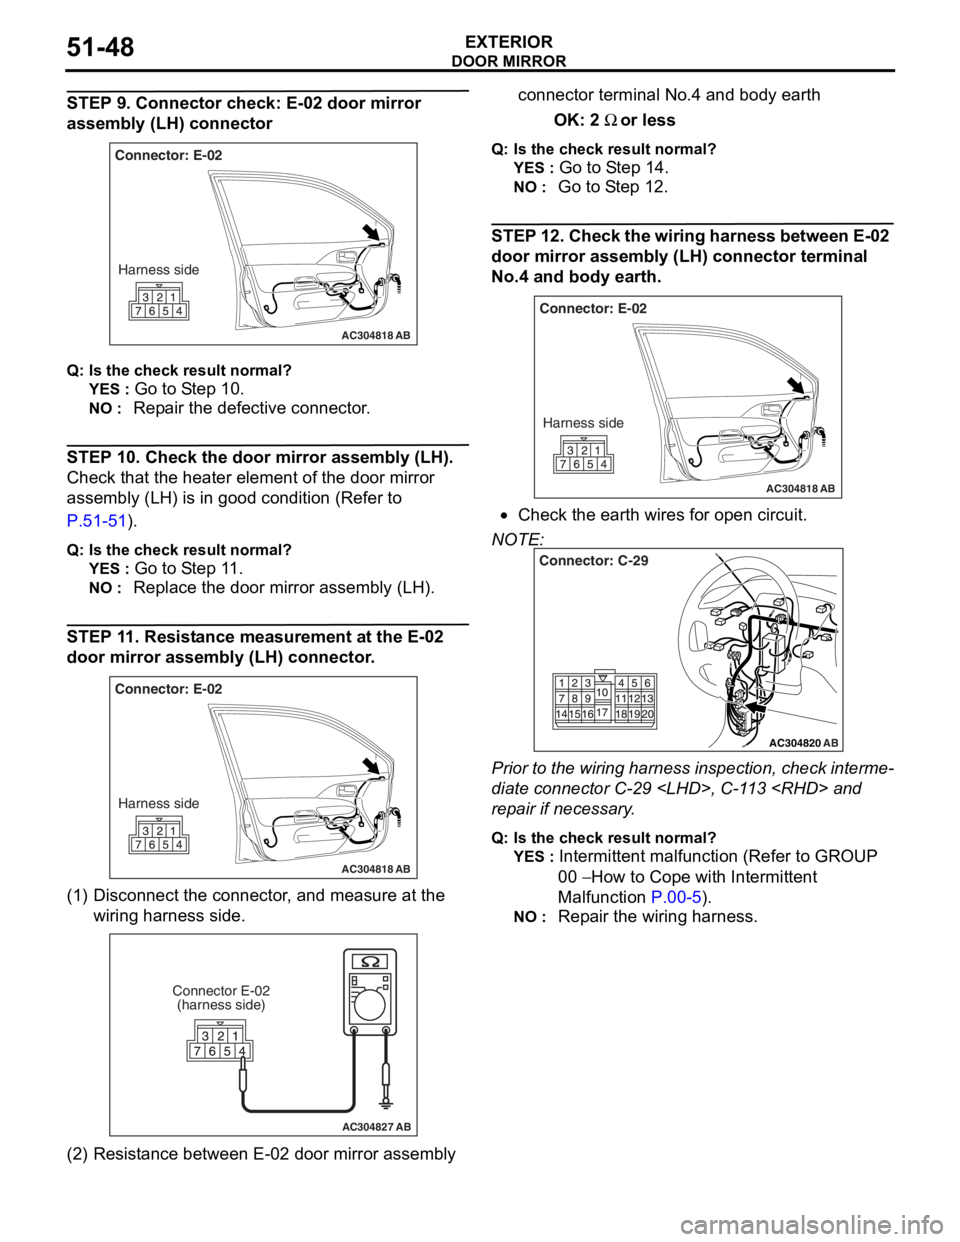 MITSUBISHI LANCER 2006  Workshop Manual 
DOOR MIRROR
EXTERIOR51-48
STEP 9. Connector check: E-02 door mirror 
assembly (LH) connector
AC304818
Connector: E-02Harness side
AB
Q : Is the check  result  normal?
YES : Go to S t ep 10 .
NO : Rep